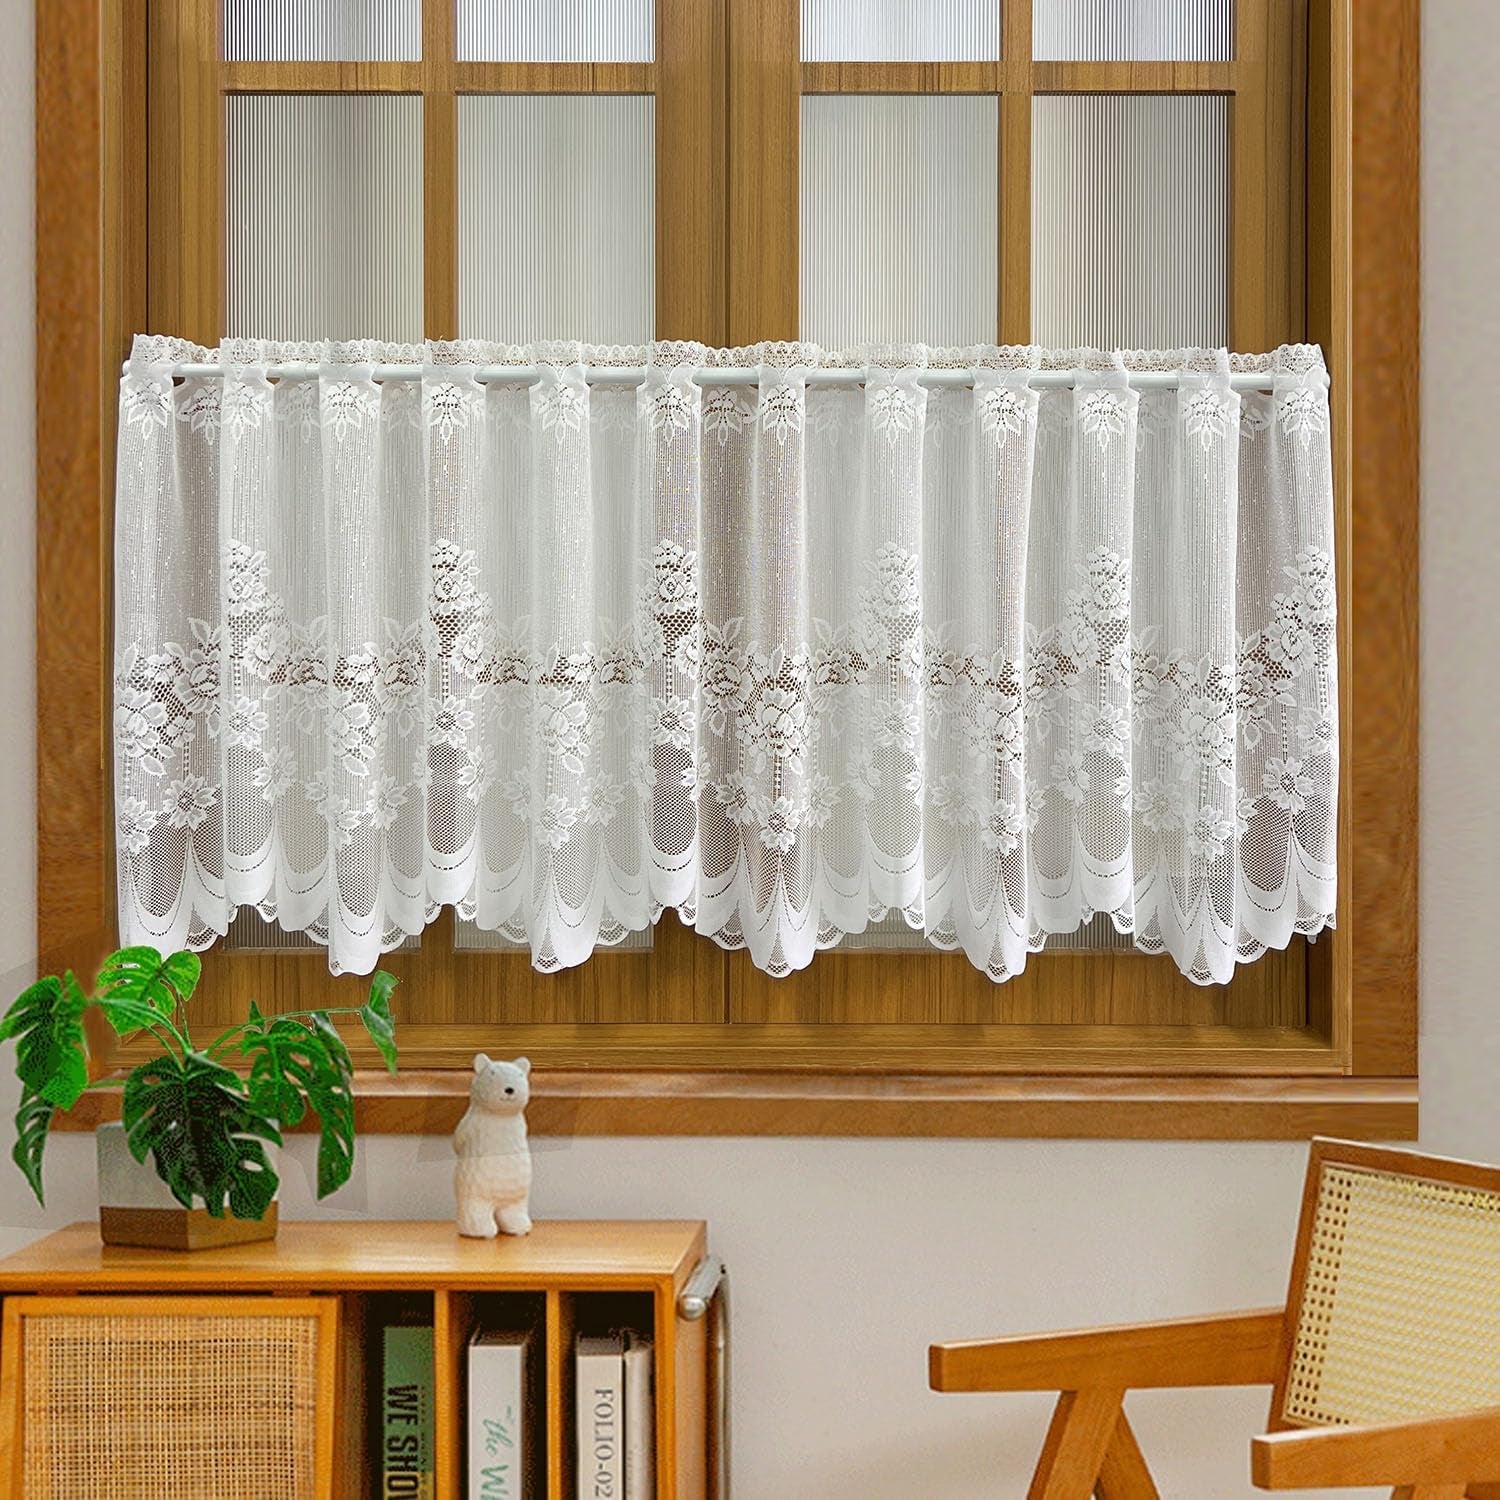 1 Panel Short Lace Curtains Valance for Kitchen Bathroom White Sheer Floral Cafe Curtains 35 Inch Length Scalloped Bottom Curtain Tiers Tulle Voile Window Treatment Rod Pocket Top W39 X L35 Inches